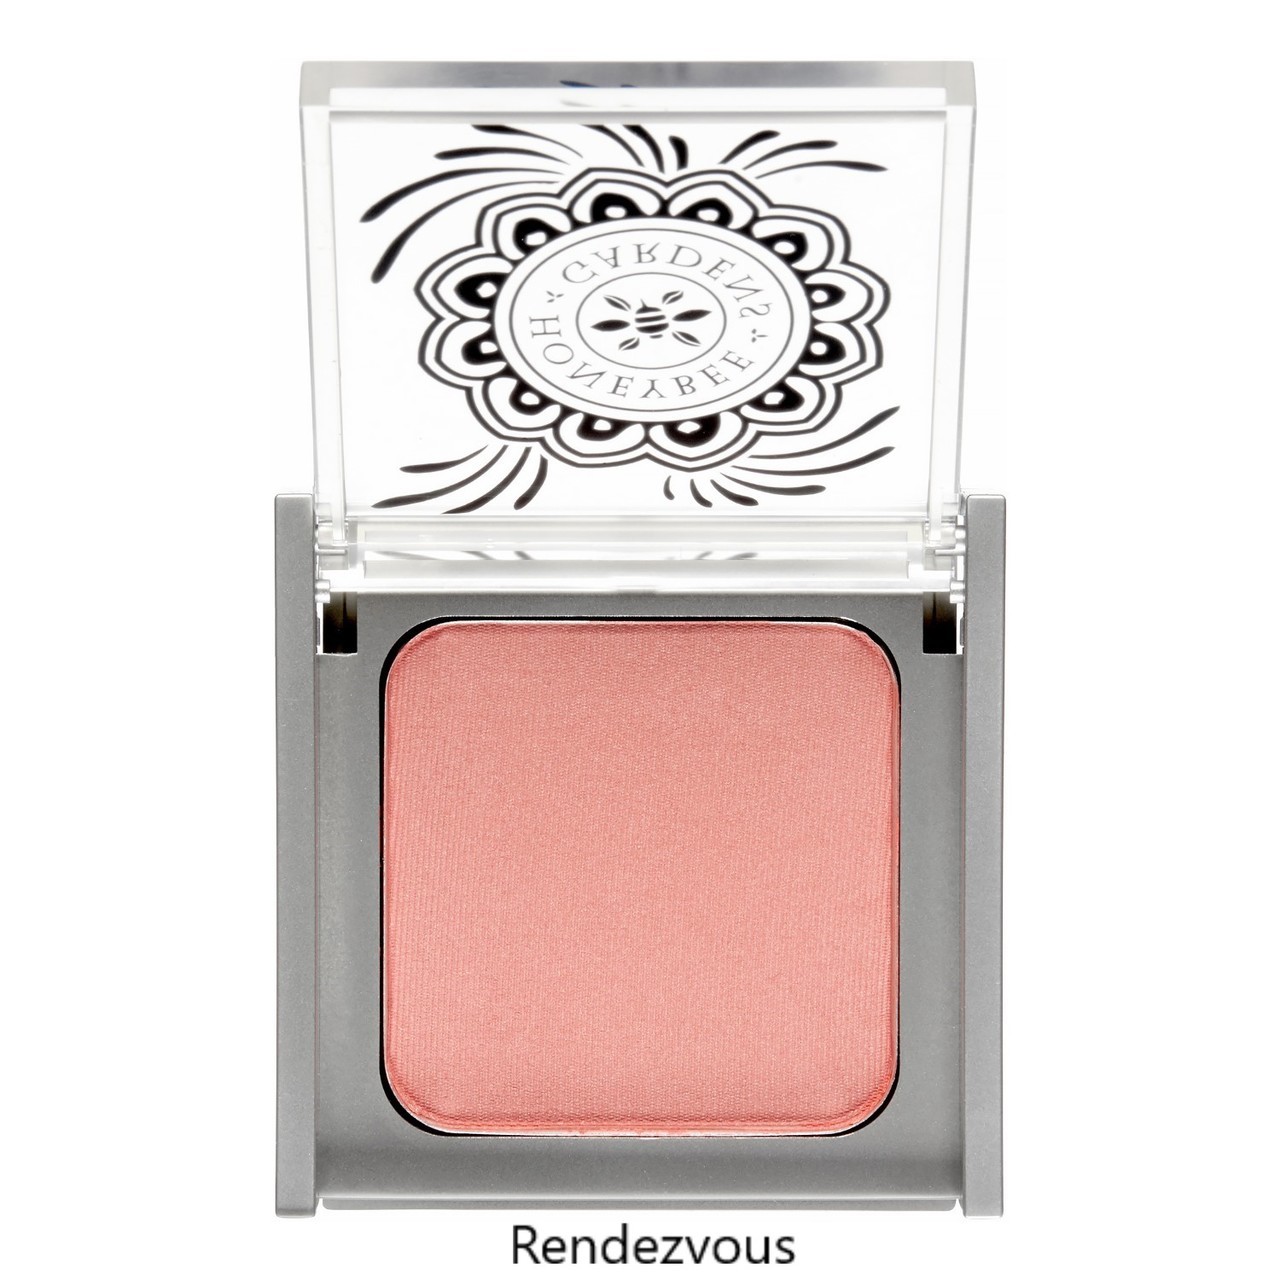 Honeybee Gardens Complexion Perfecting Blush - Rendezvous from gimme the good stuff